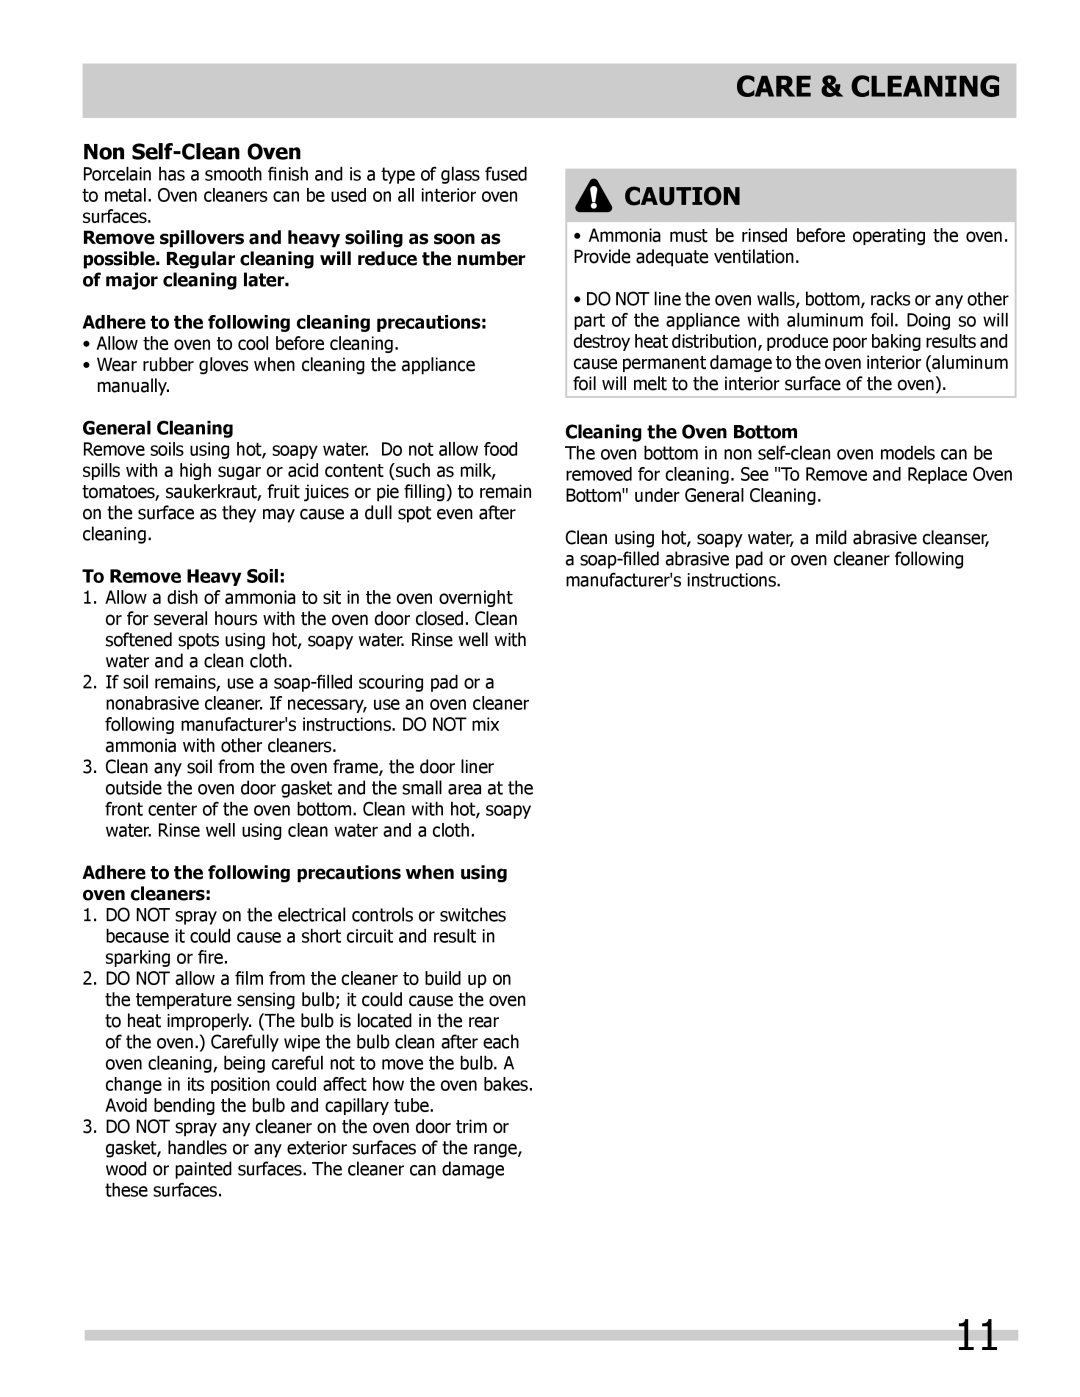 Frigidaire FGB24T3EB, FGB24T3EC, FGB24T3ES important safety instructions Care & Cleaning, Non Self-CleanOven 